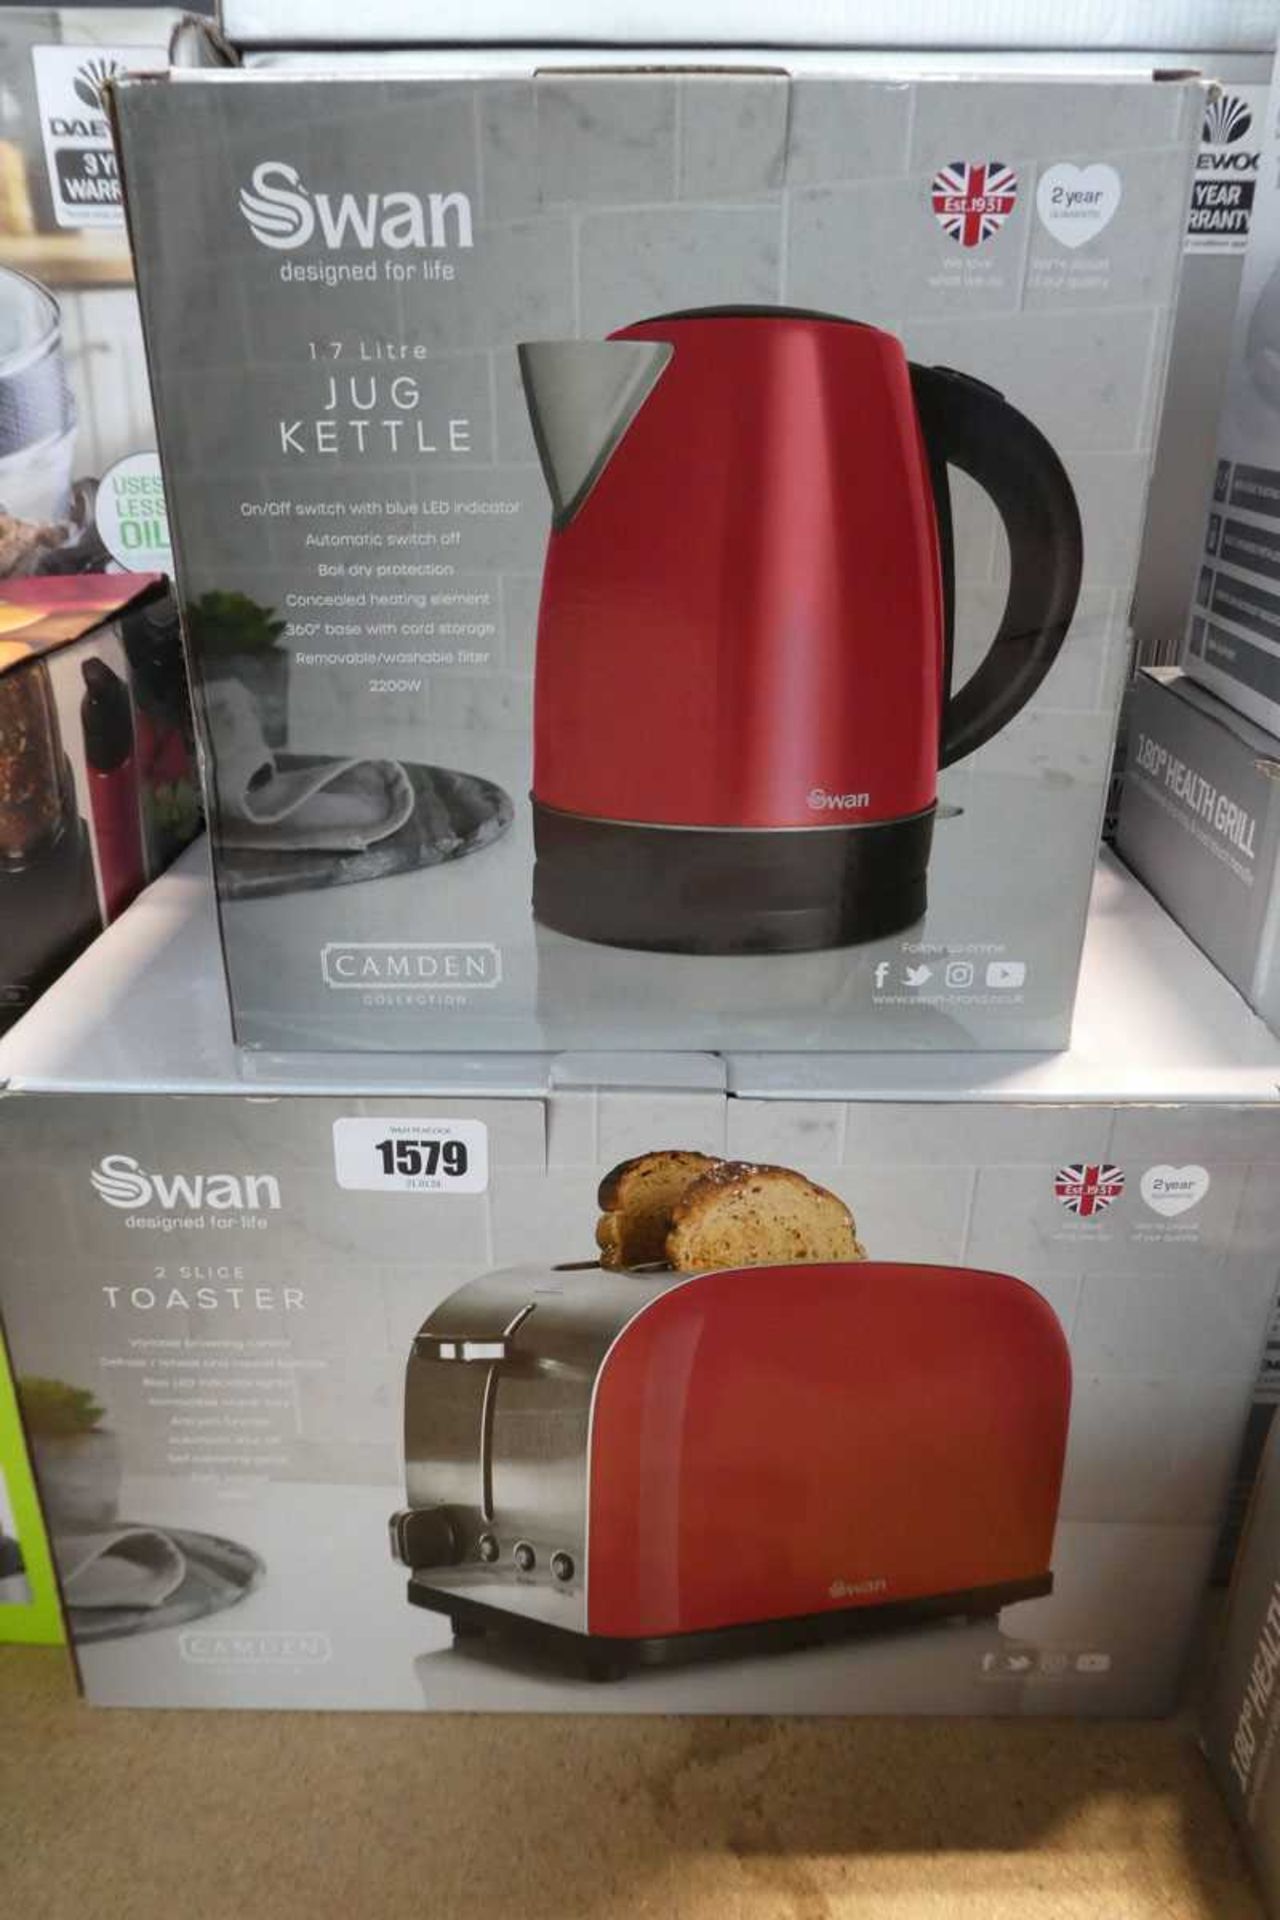 Swan 1.7L jug kettle together with a Swan 2 slice toaster and a Swan 1.5L slow cooker - Image 2 of 2